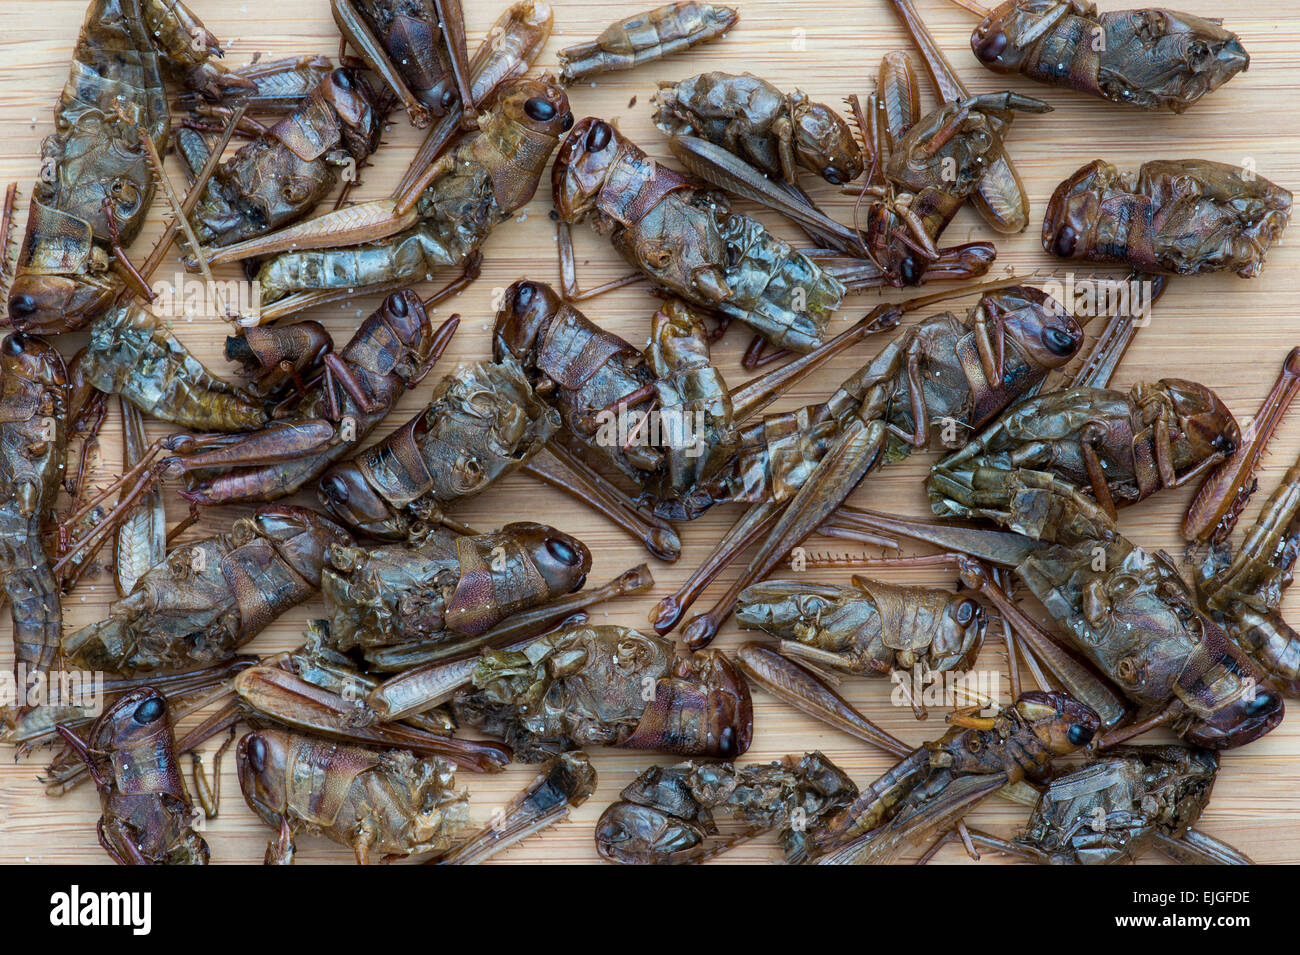 Edible insects. Locusts Stock Photo